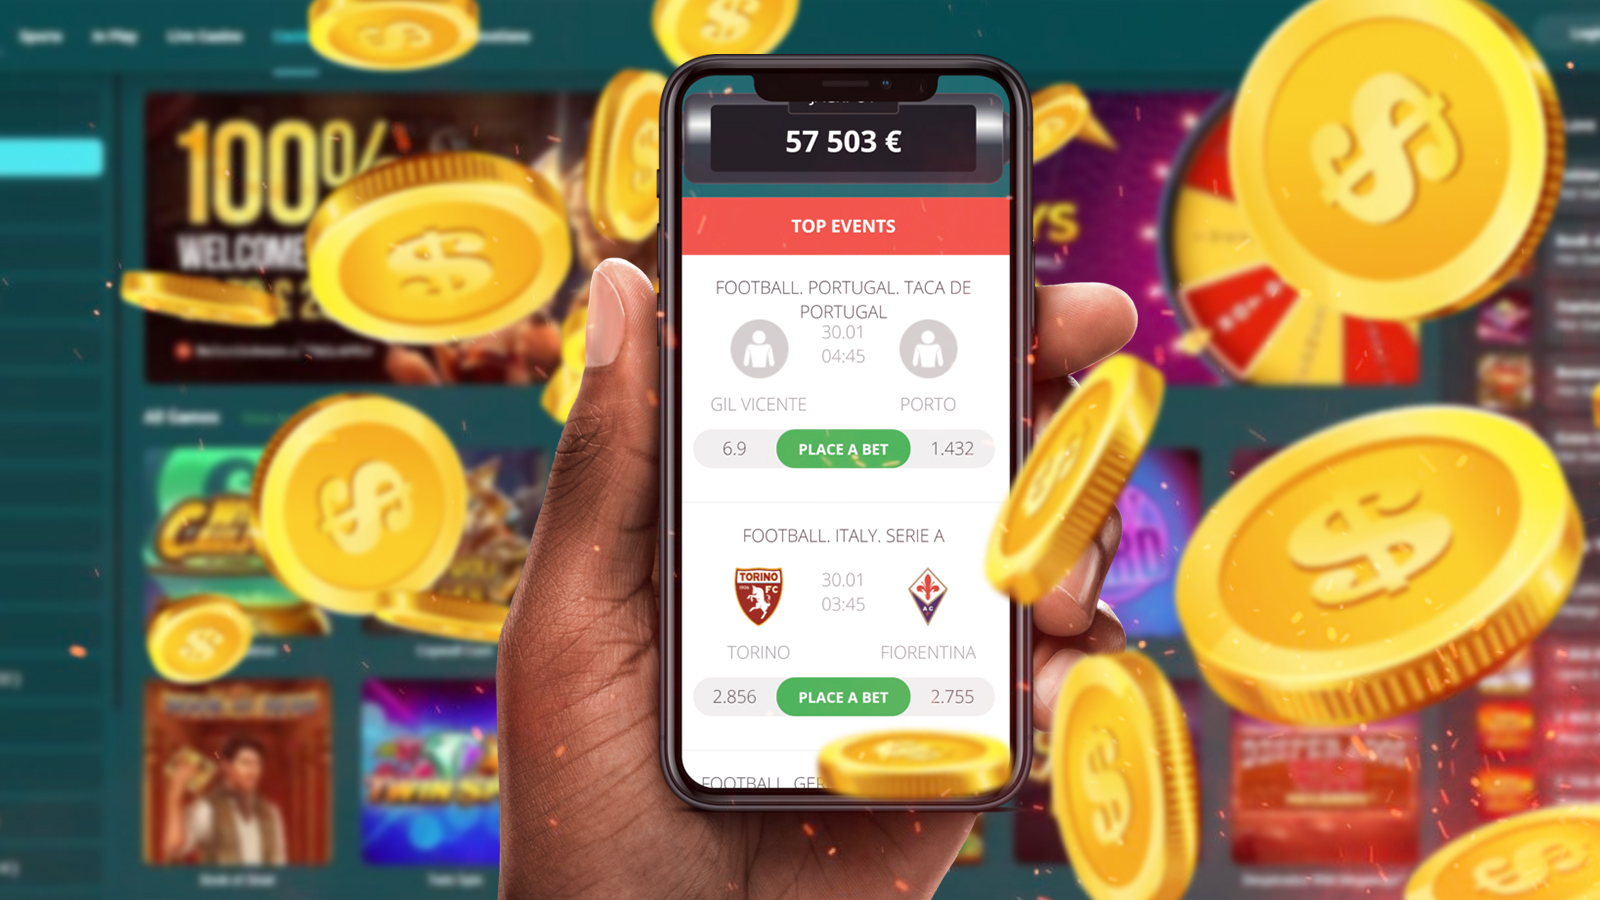 22bet Casino accepts most of popular payment systems in India, so you can make deposits and withdrawals with ease.